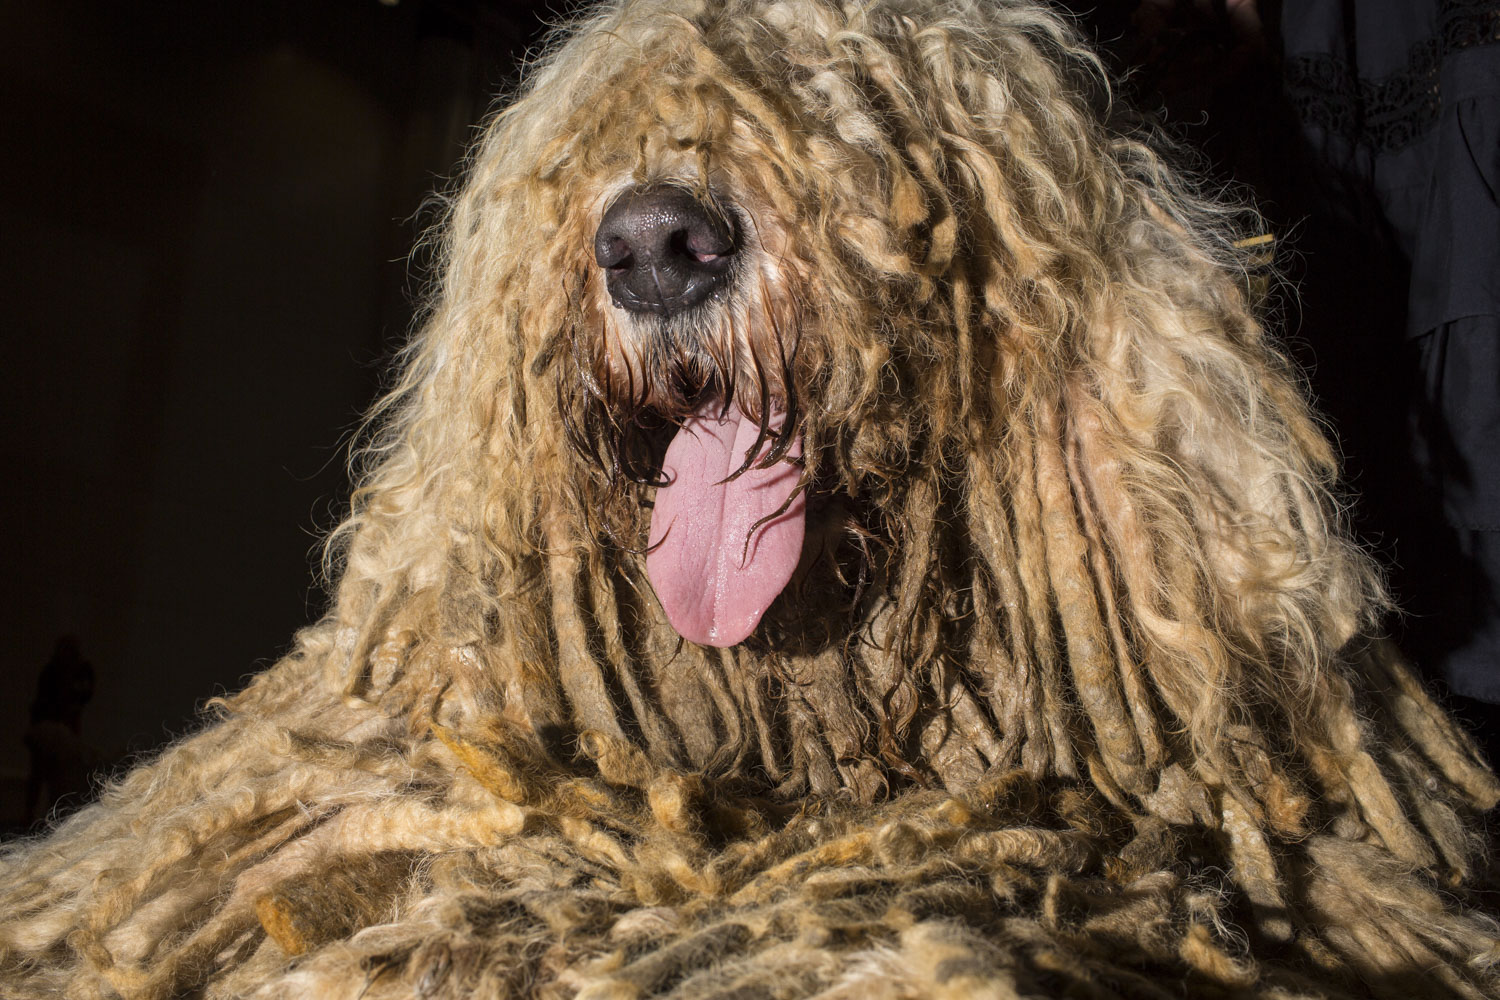 HELSINKI, FINLAND - AUG 10: Sibbes, a five year old male Komondor from Finland sticks out his tongue during the 2014 World Dog Show on Sunday, August 10th, 2014, in Helsinki, Finland. (Photo by Landon Nordeman)